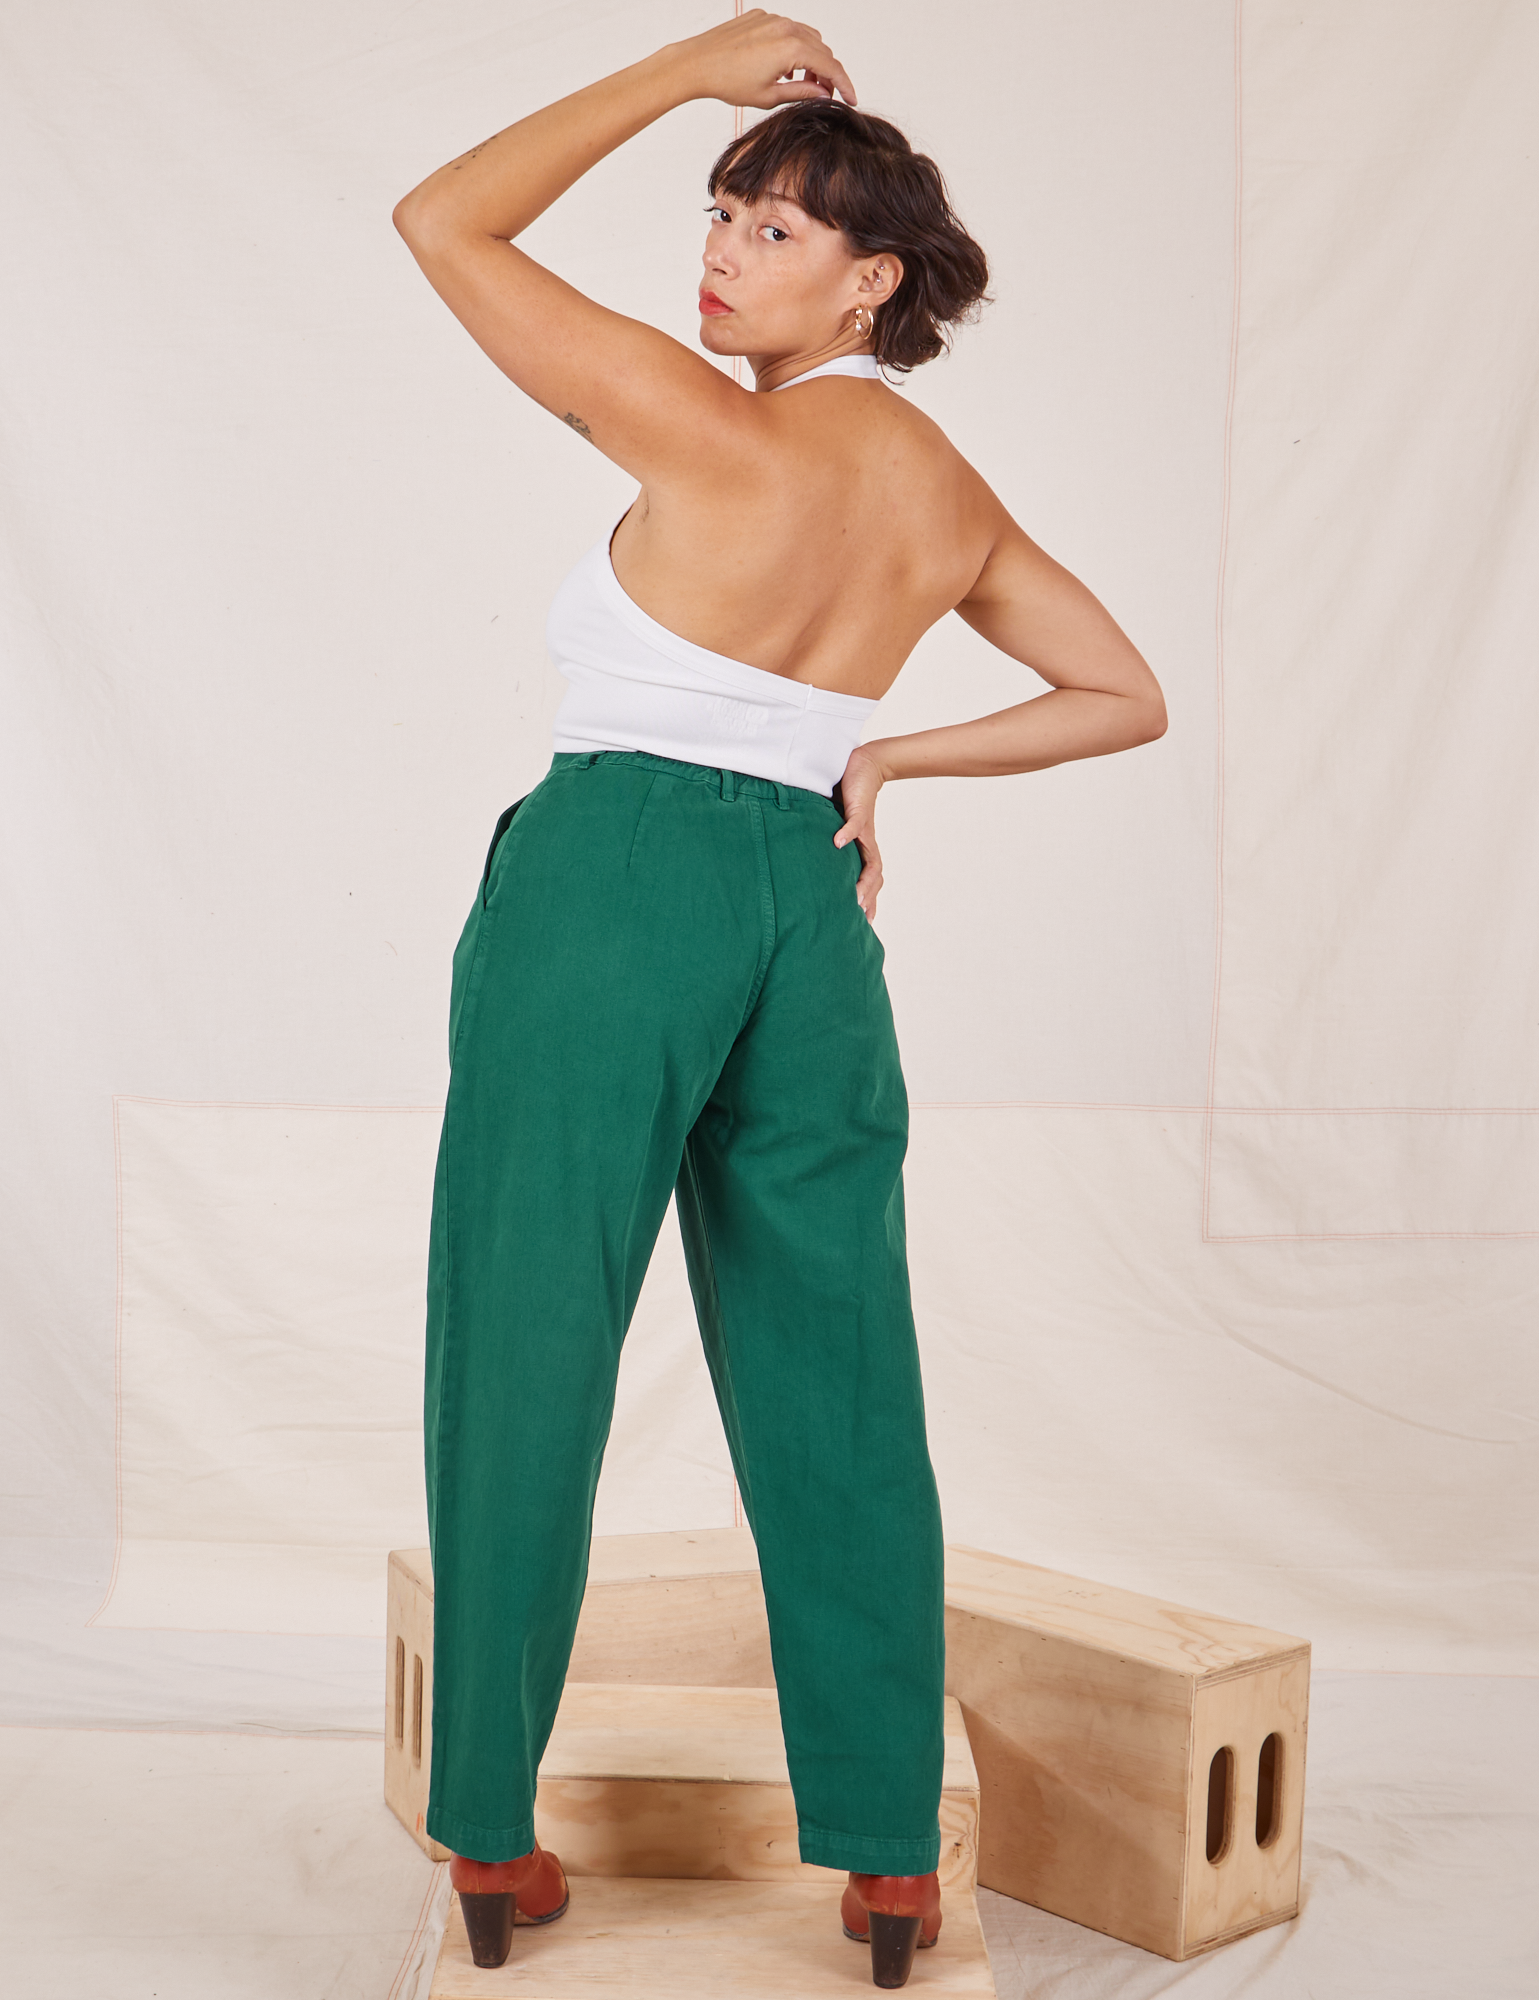 Back view of Heavyweight Trousers in Hunter Green and vintage off-white Halter Top